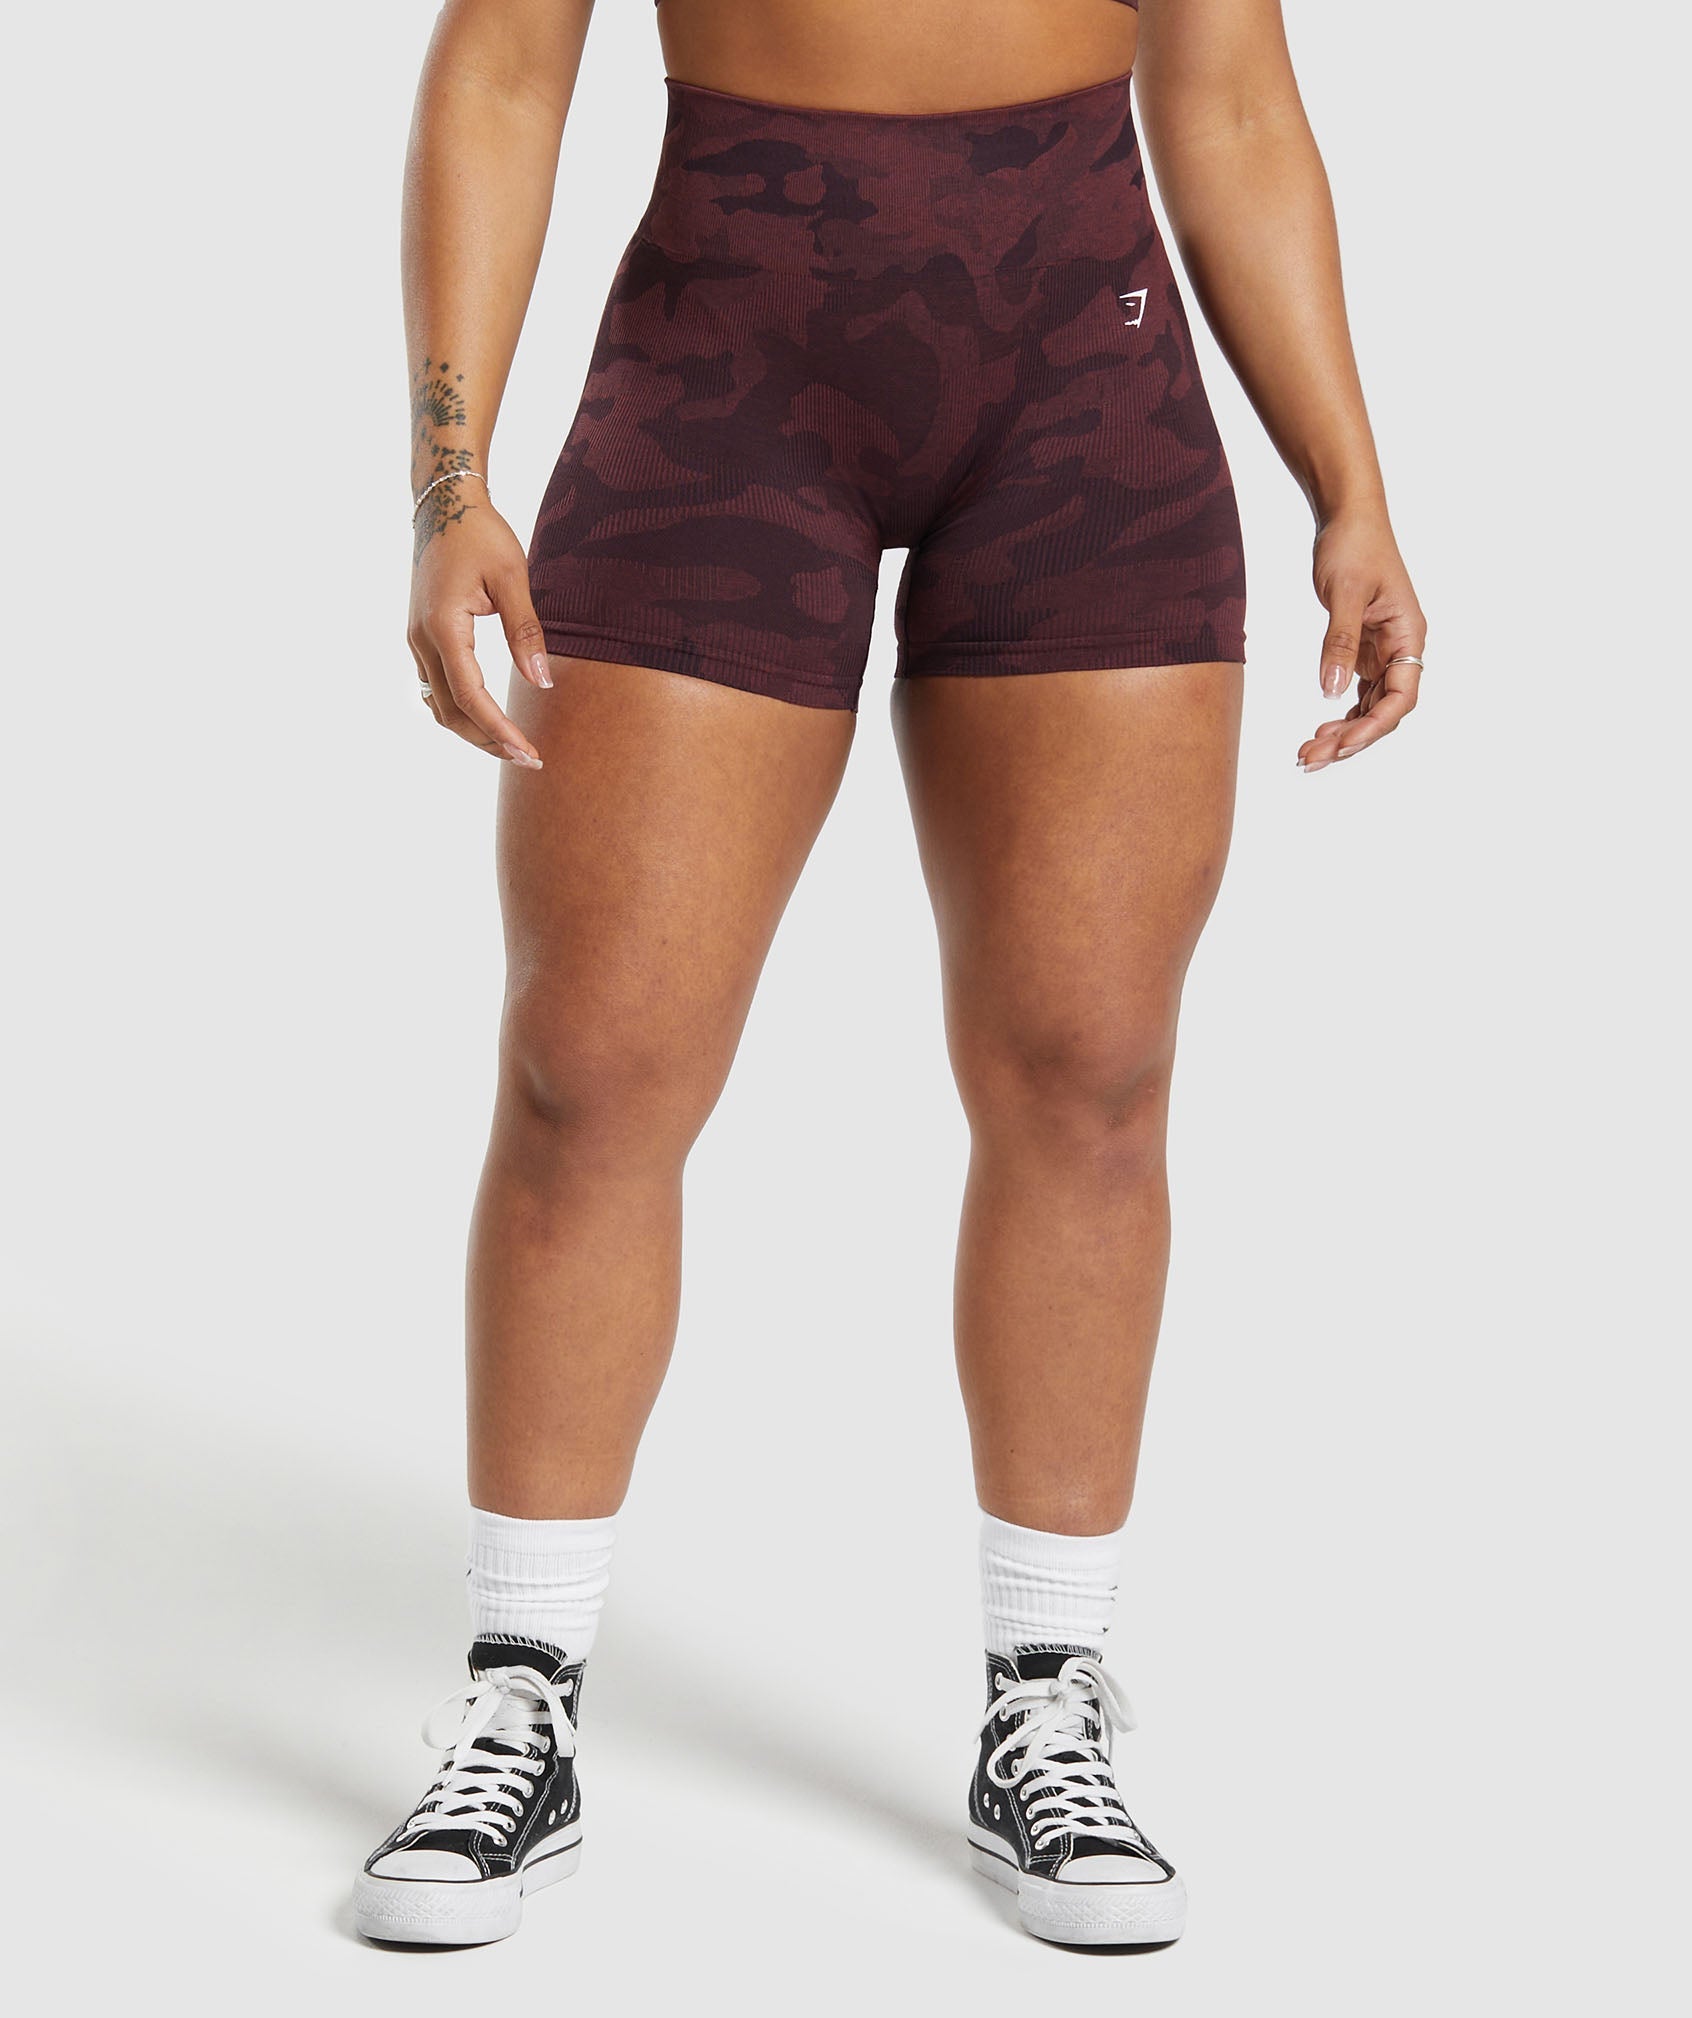 Adapt Camo Seamless Shorts in Plum Brown/Burgundy Brown - view 1